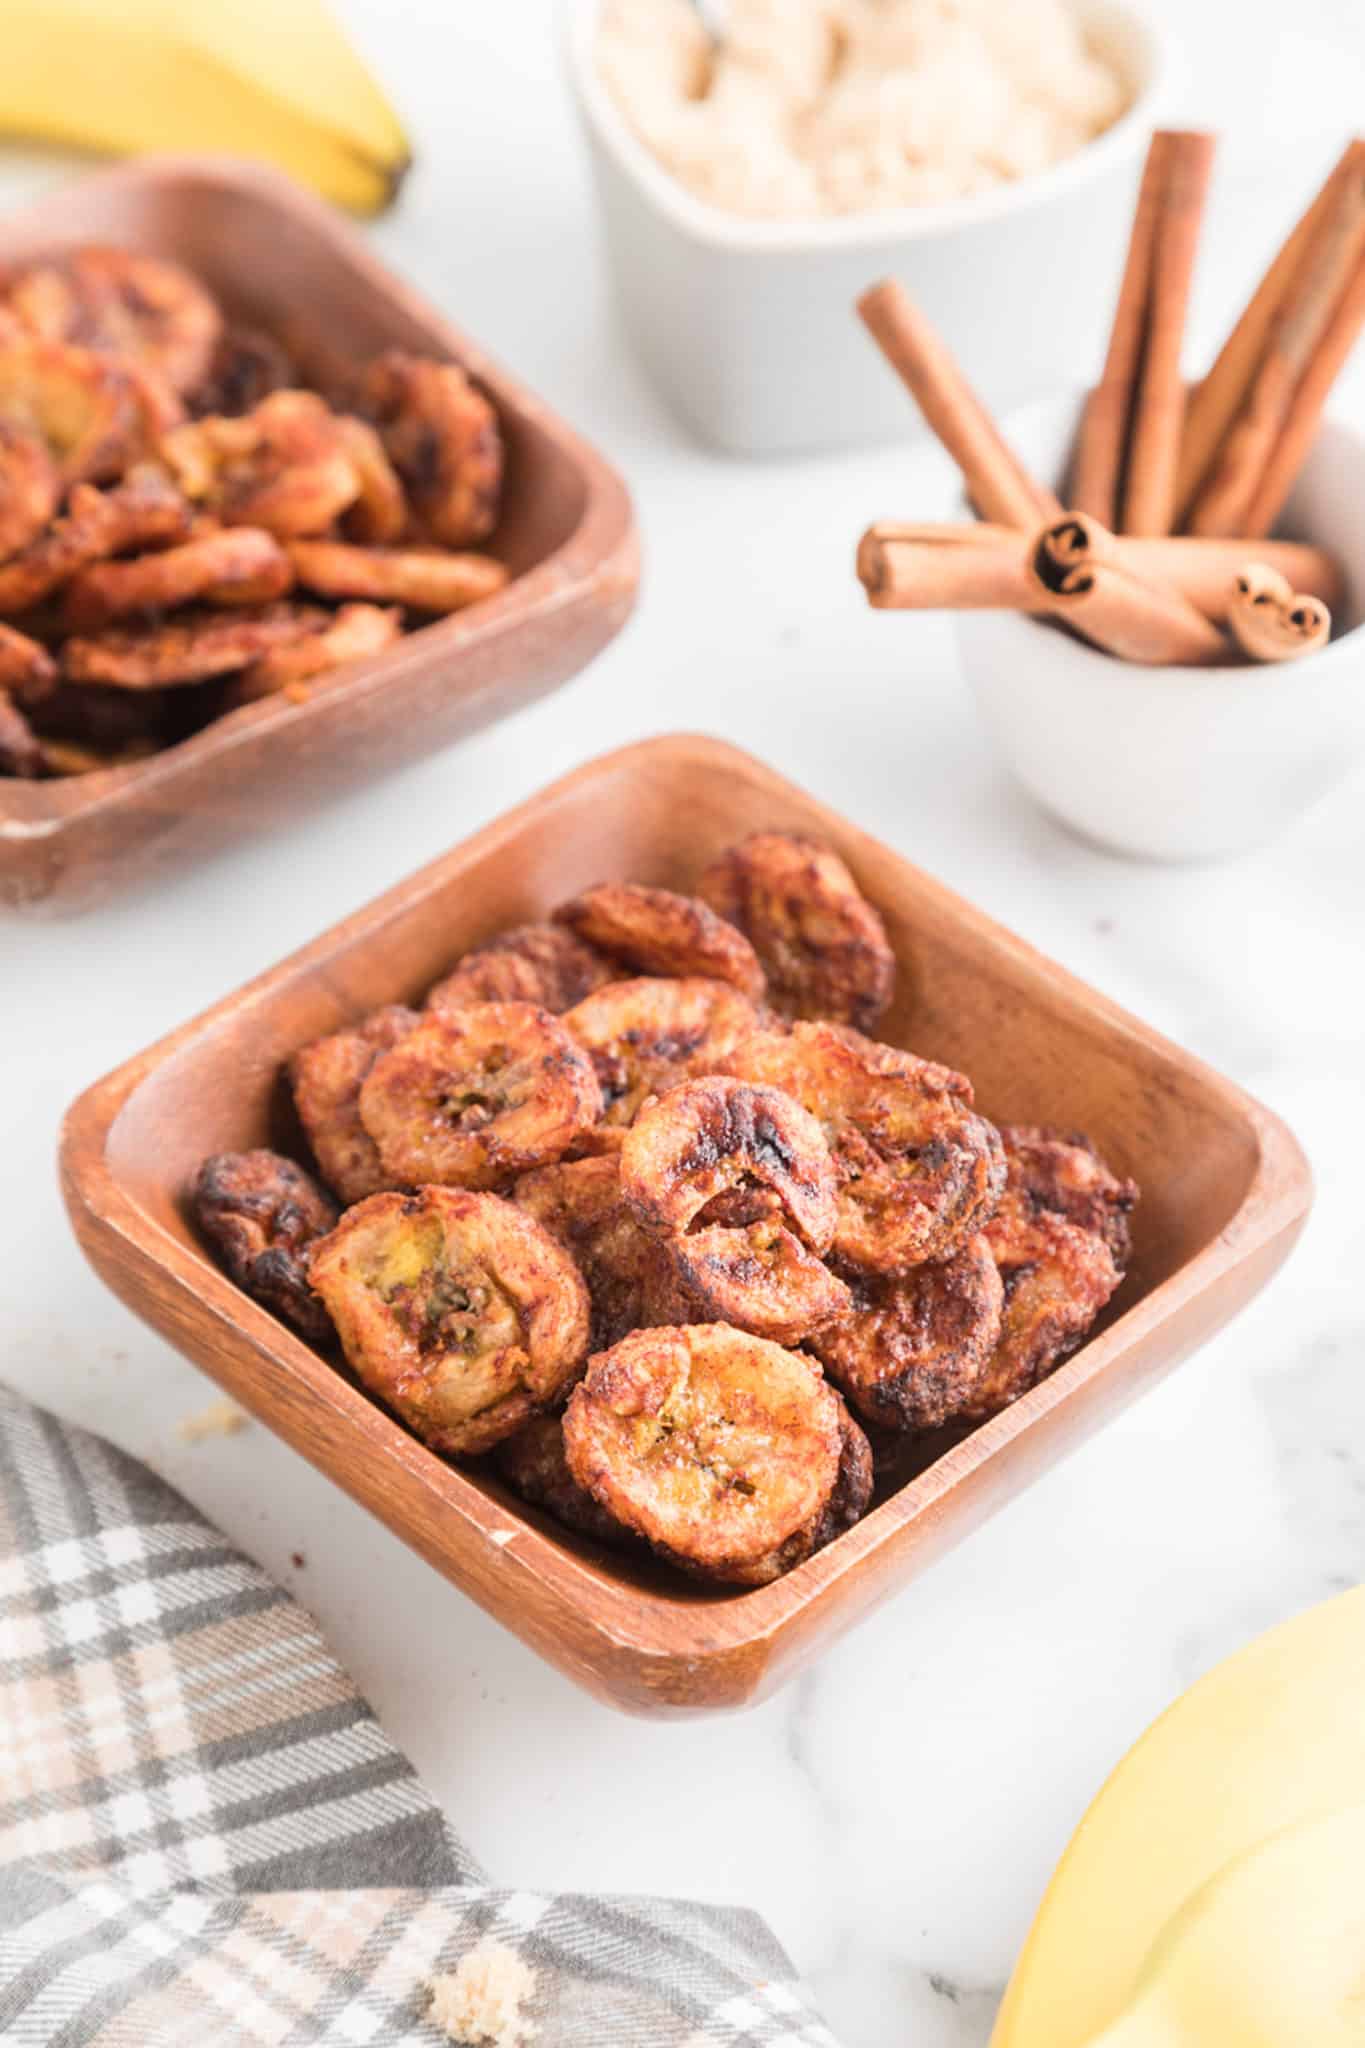 A square wooden bowl filled with air fryer cinnamon banana chips.